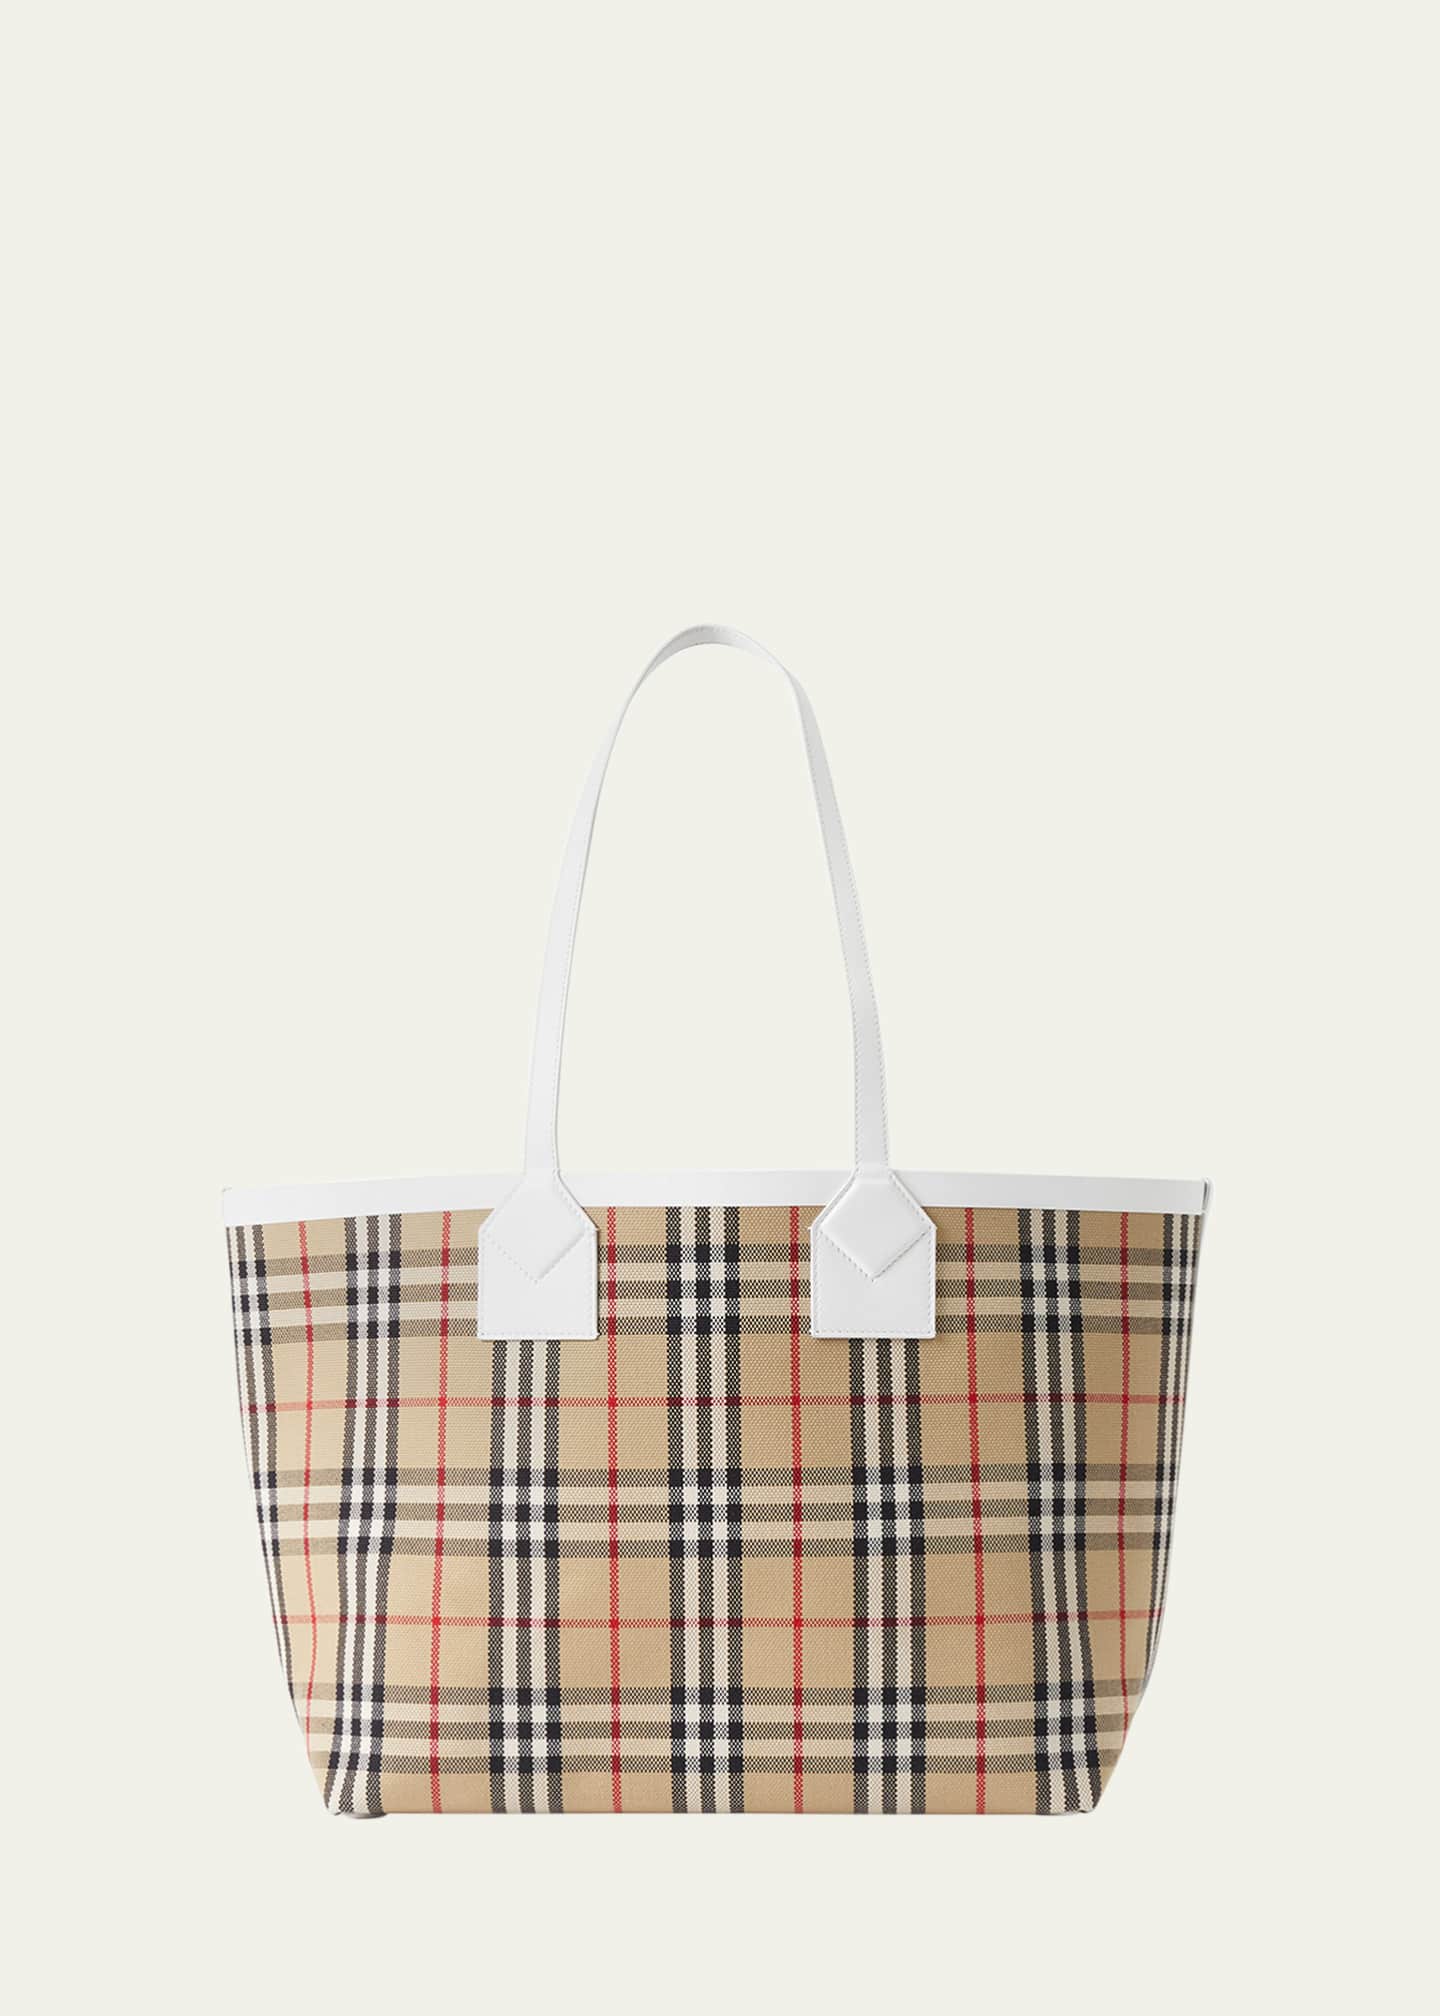 Burberry Canvas Tote Bag